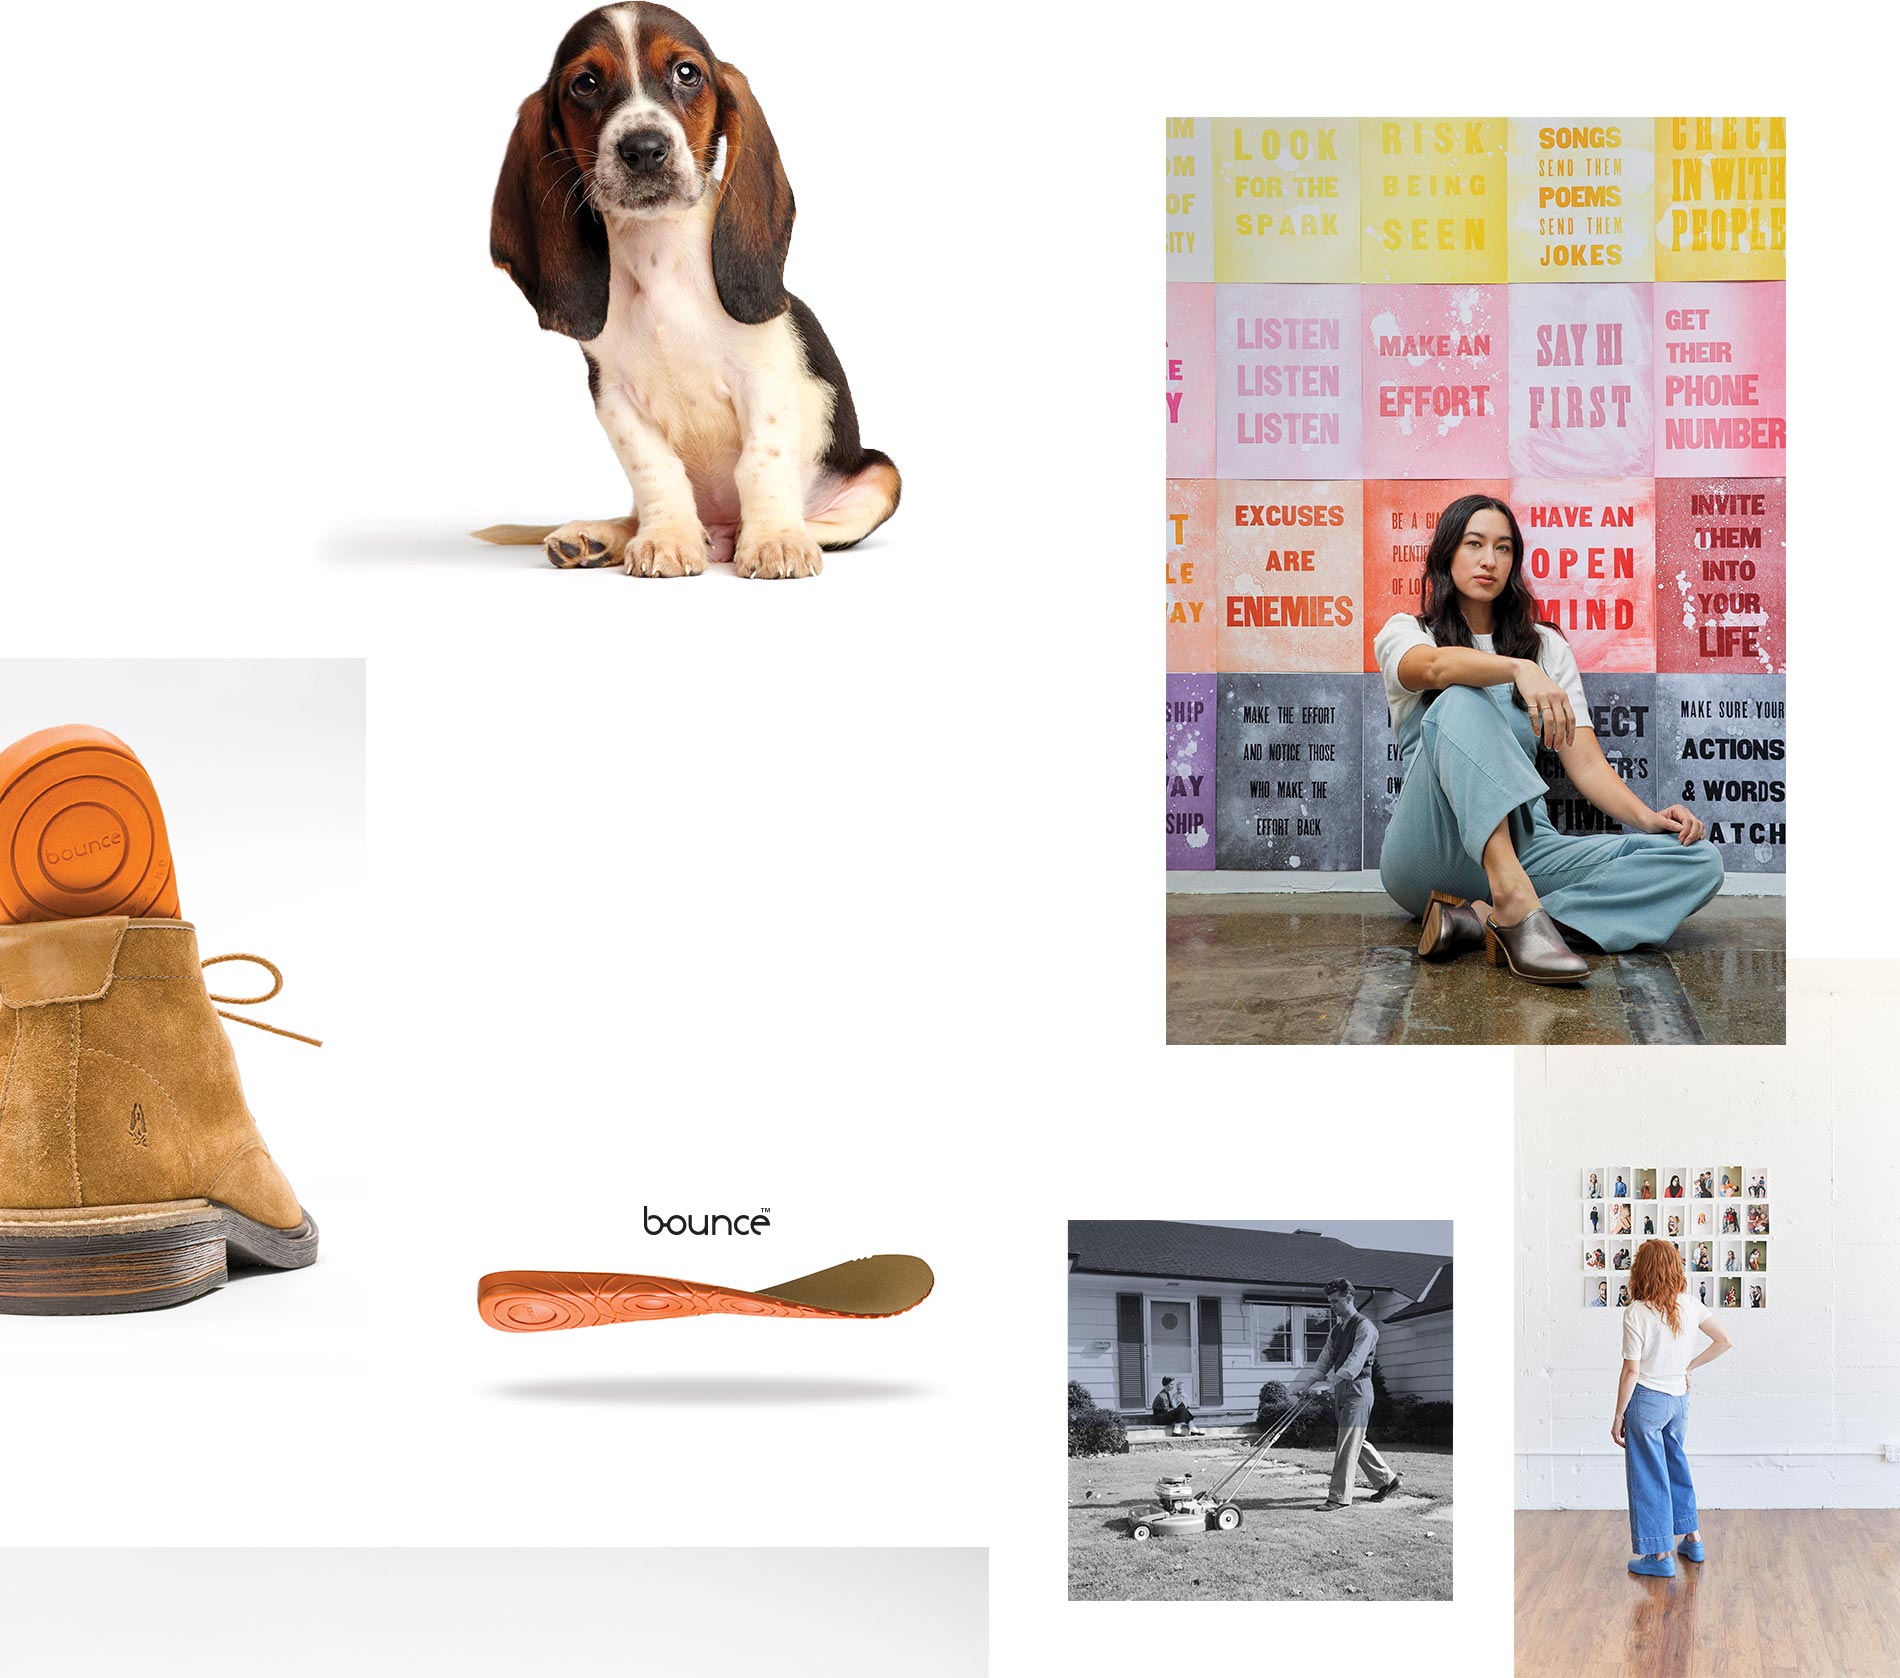 A Basset Hound puppy  adorably looking back at you. Female sitting in front of an inspirational wall of signs. Bounce technology shown through shoe insert. 